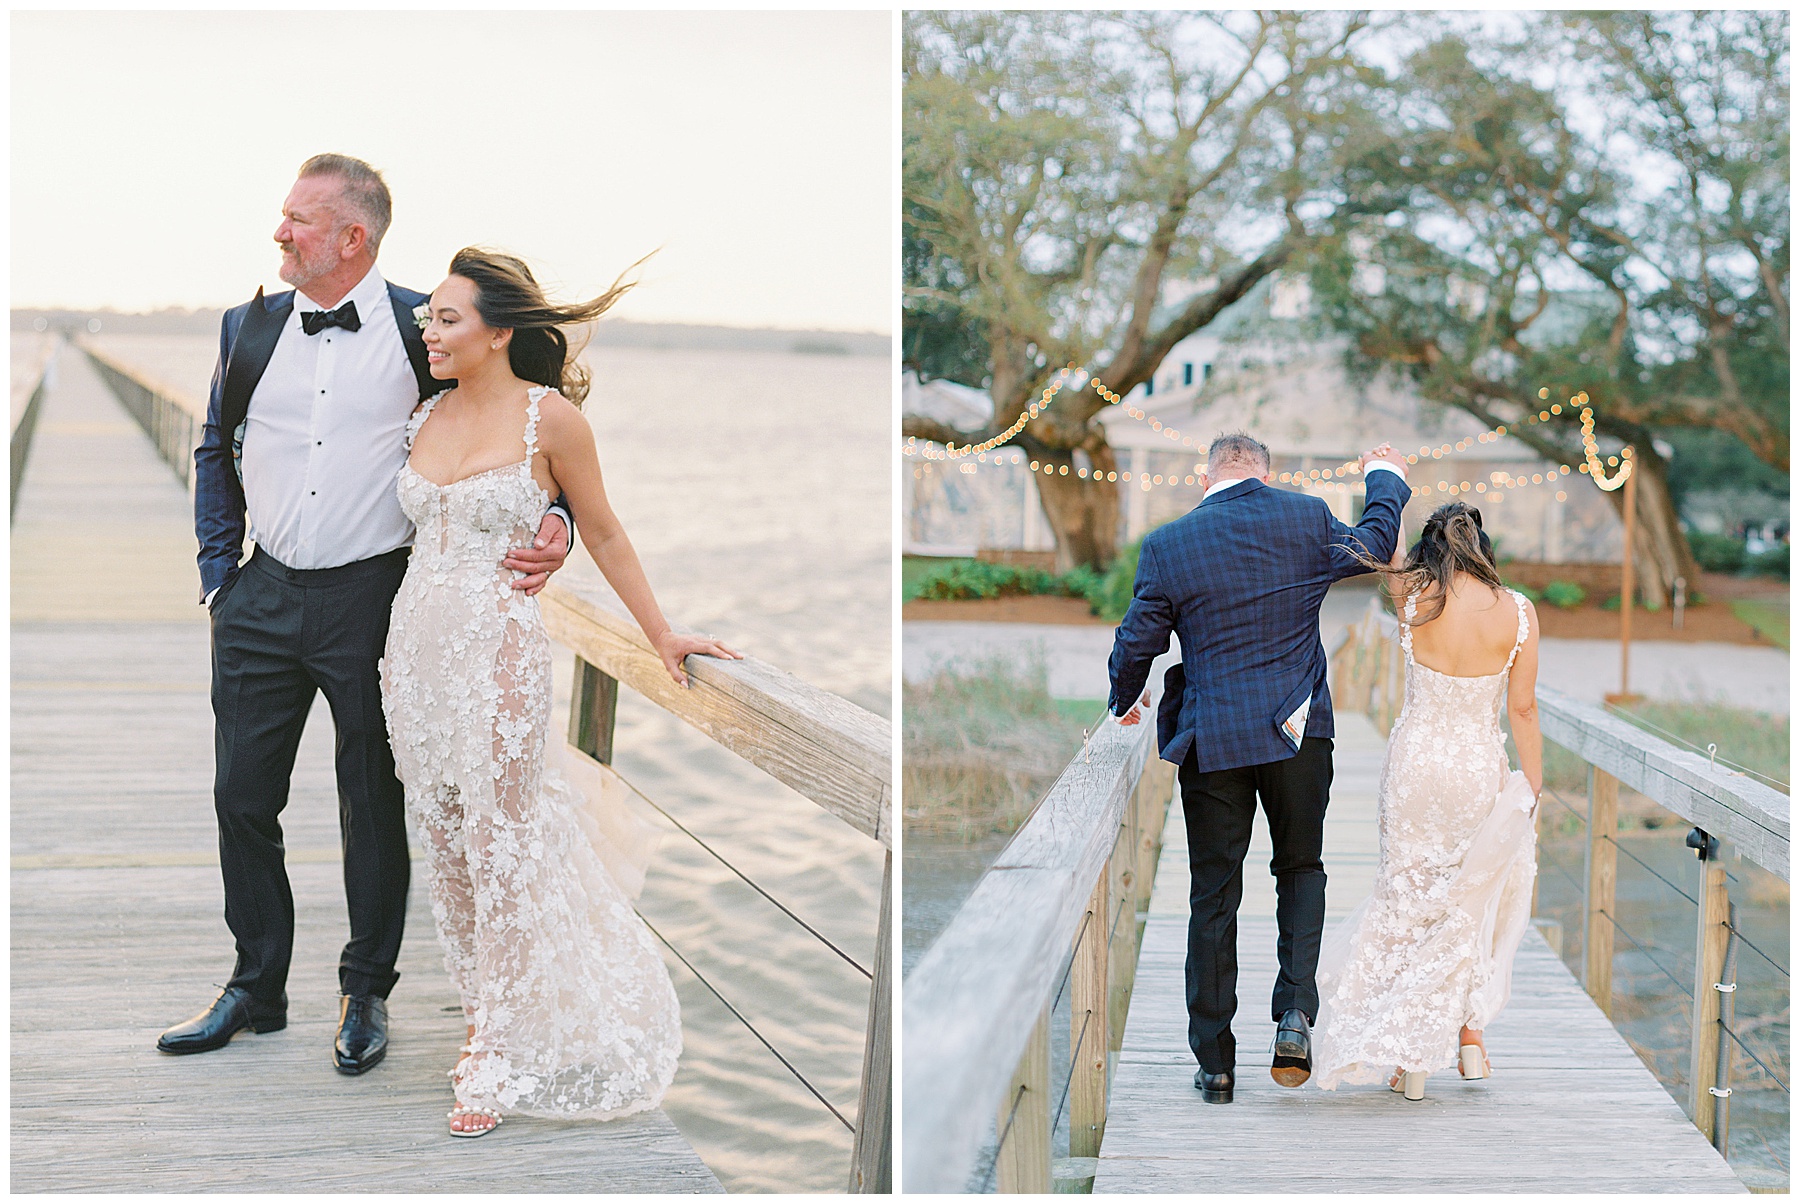 newlyweds hold hands walking on wooden dock during spring wedding photos at Lowndes Grove